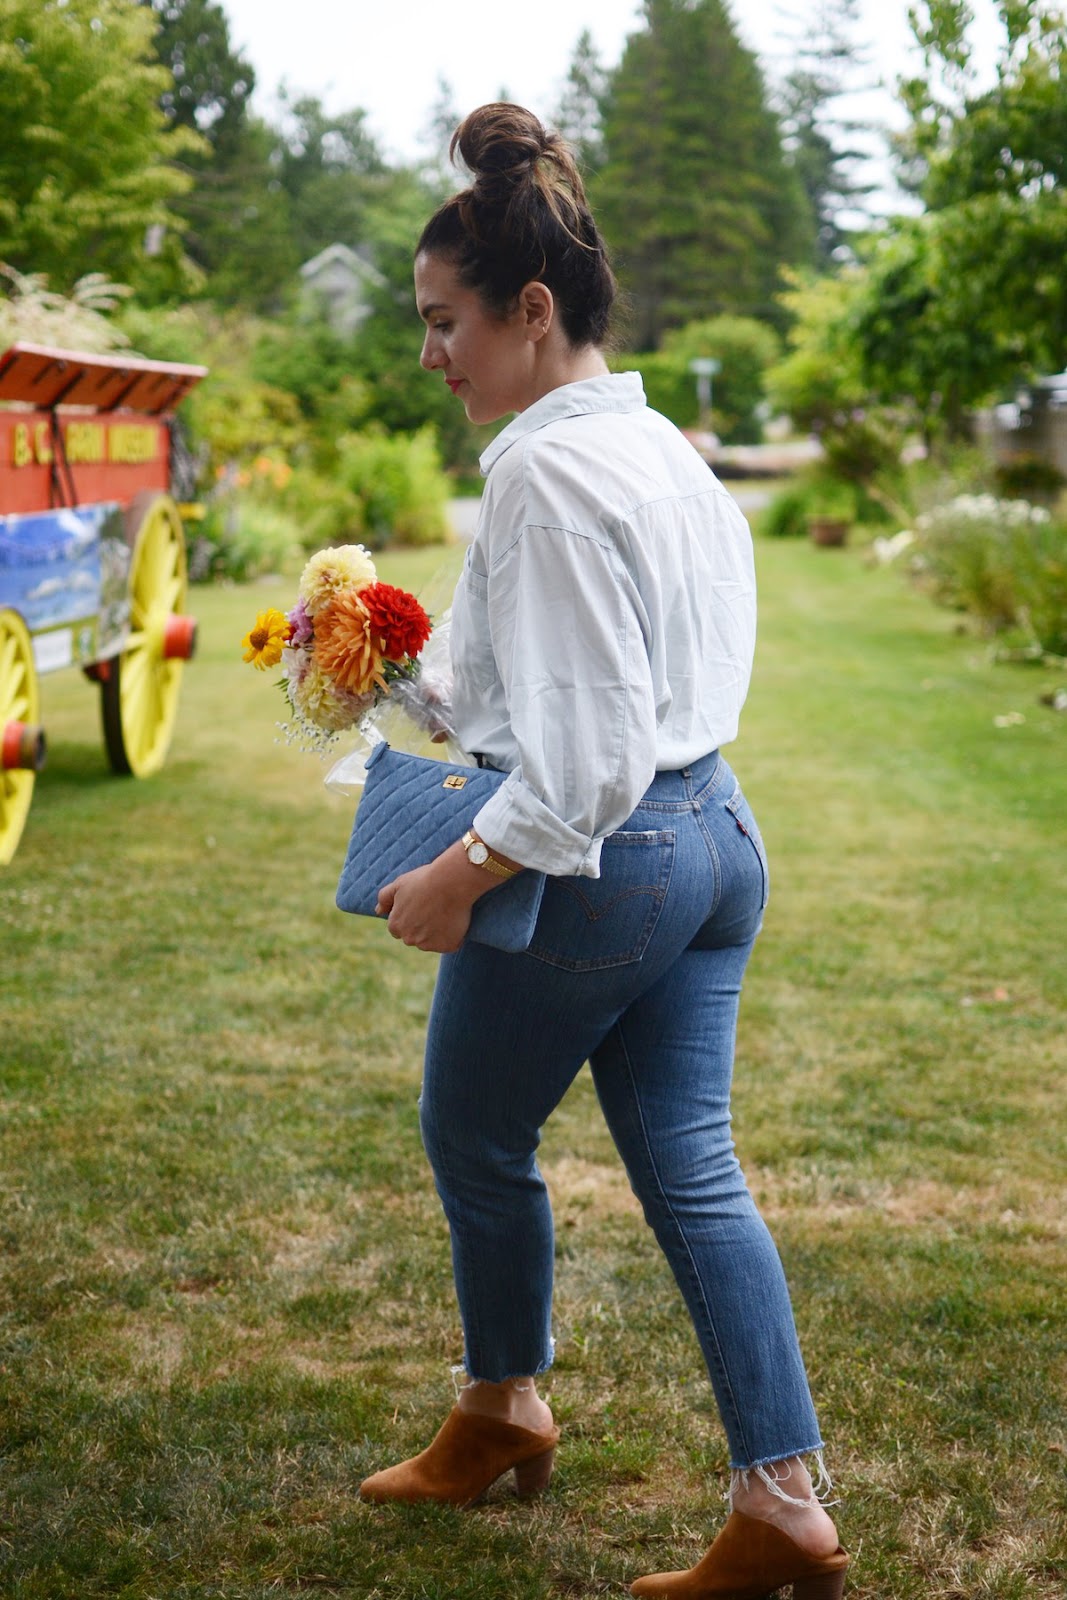 Chanel denim pouch levi's wedgie jeans outfit fort langley vancouver fashion blogger Canadian tuxedo outfit